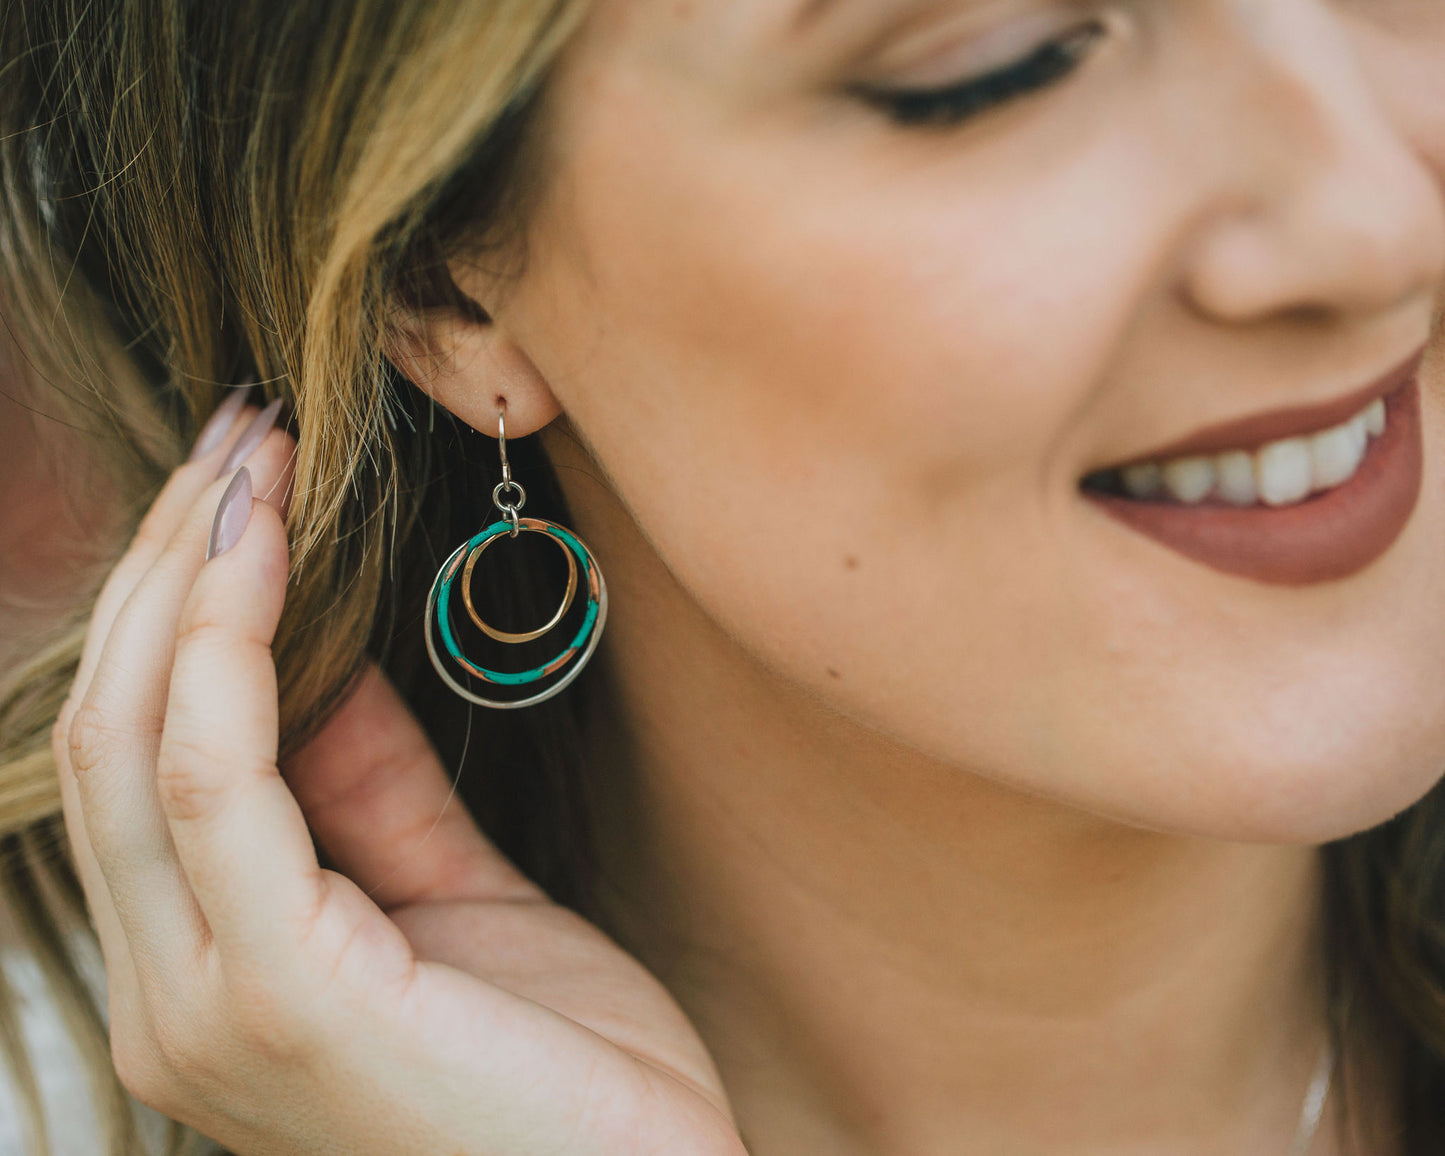 This design is lightweight and highly wearable. The mixed metal composition compliments any ensemble and the Mint patina offers an eye-catching surprise. These lively and luxurious mixed metal earrings are destined to become an instant favorite.